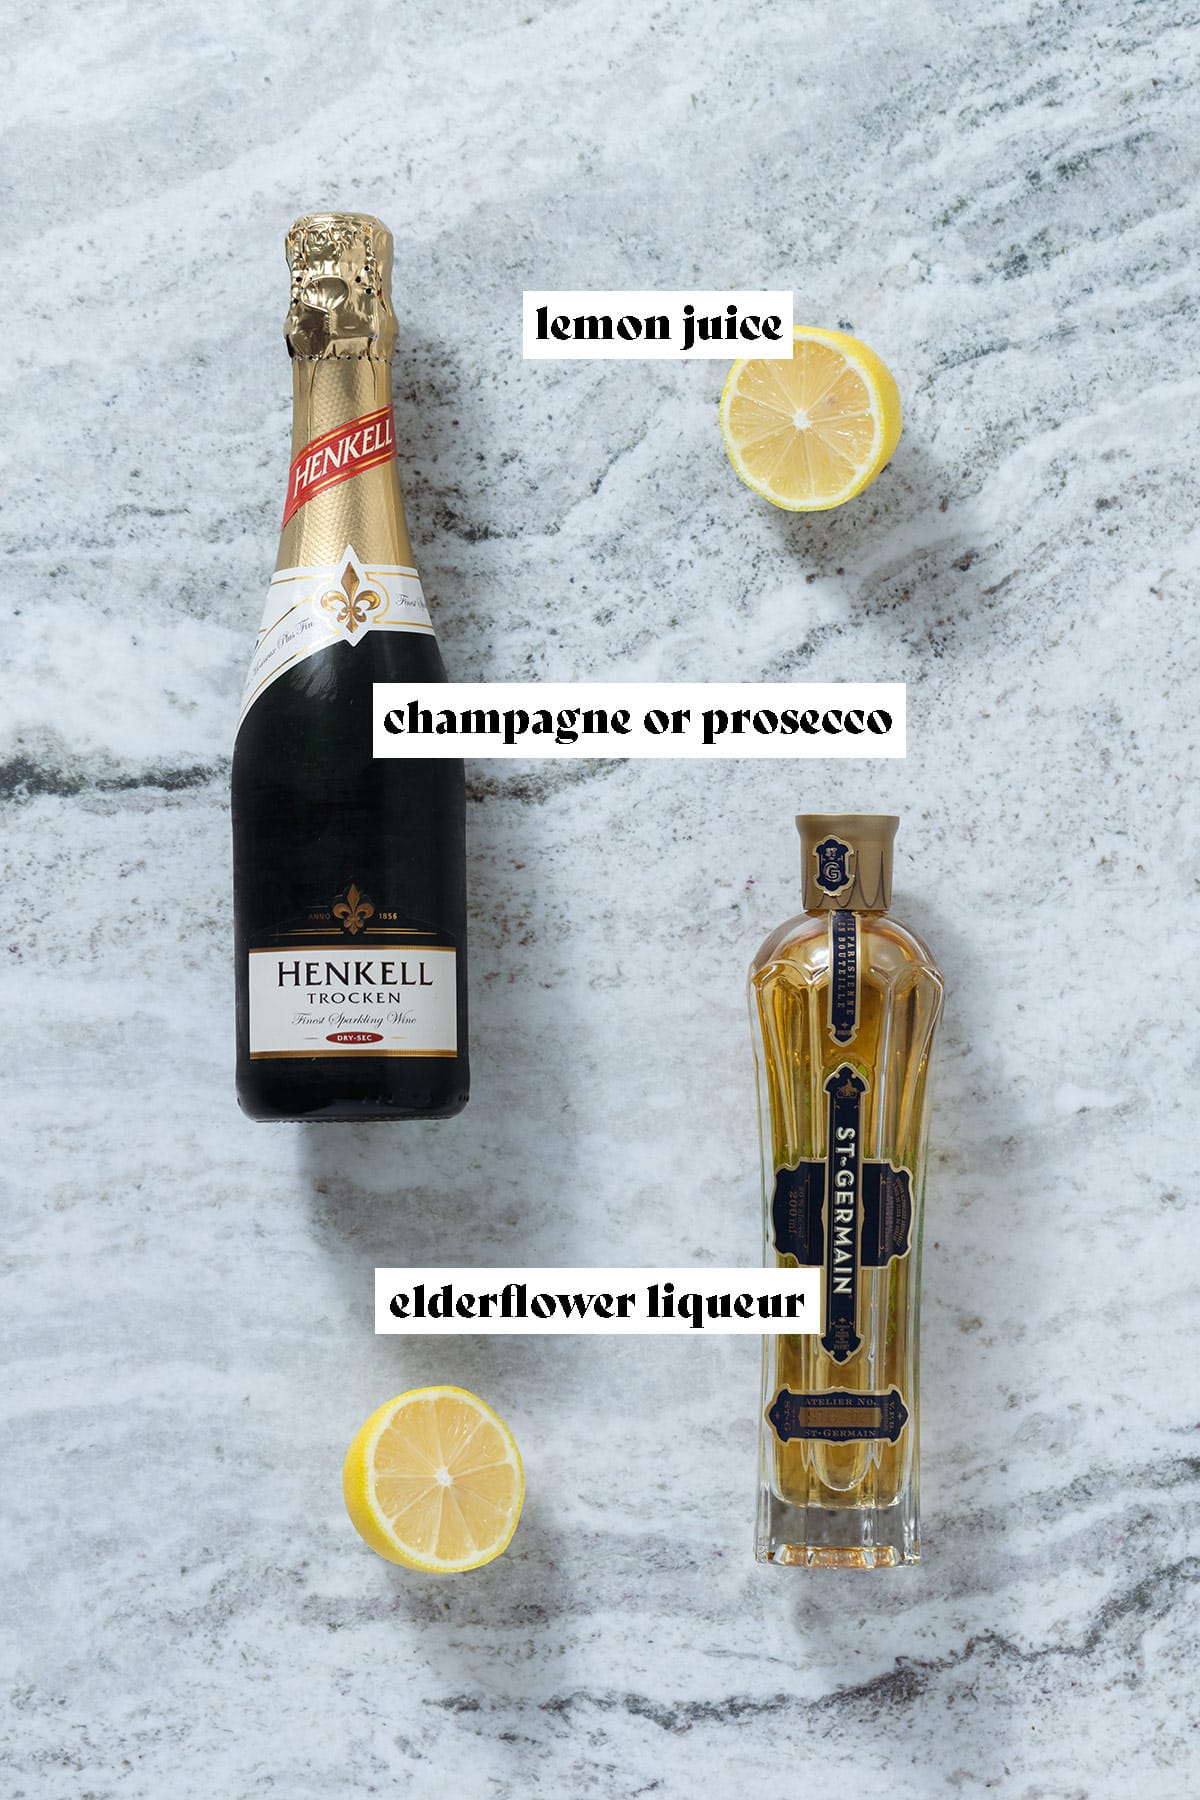 A bottle of Prosecco, St Germain liqueur, and a lemon cut in half on a grey stone background with text overlay.